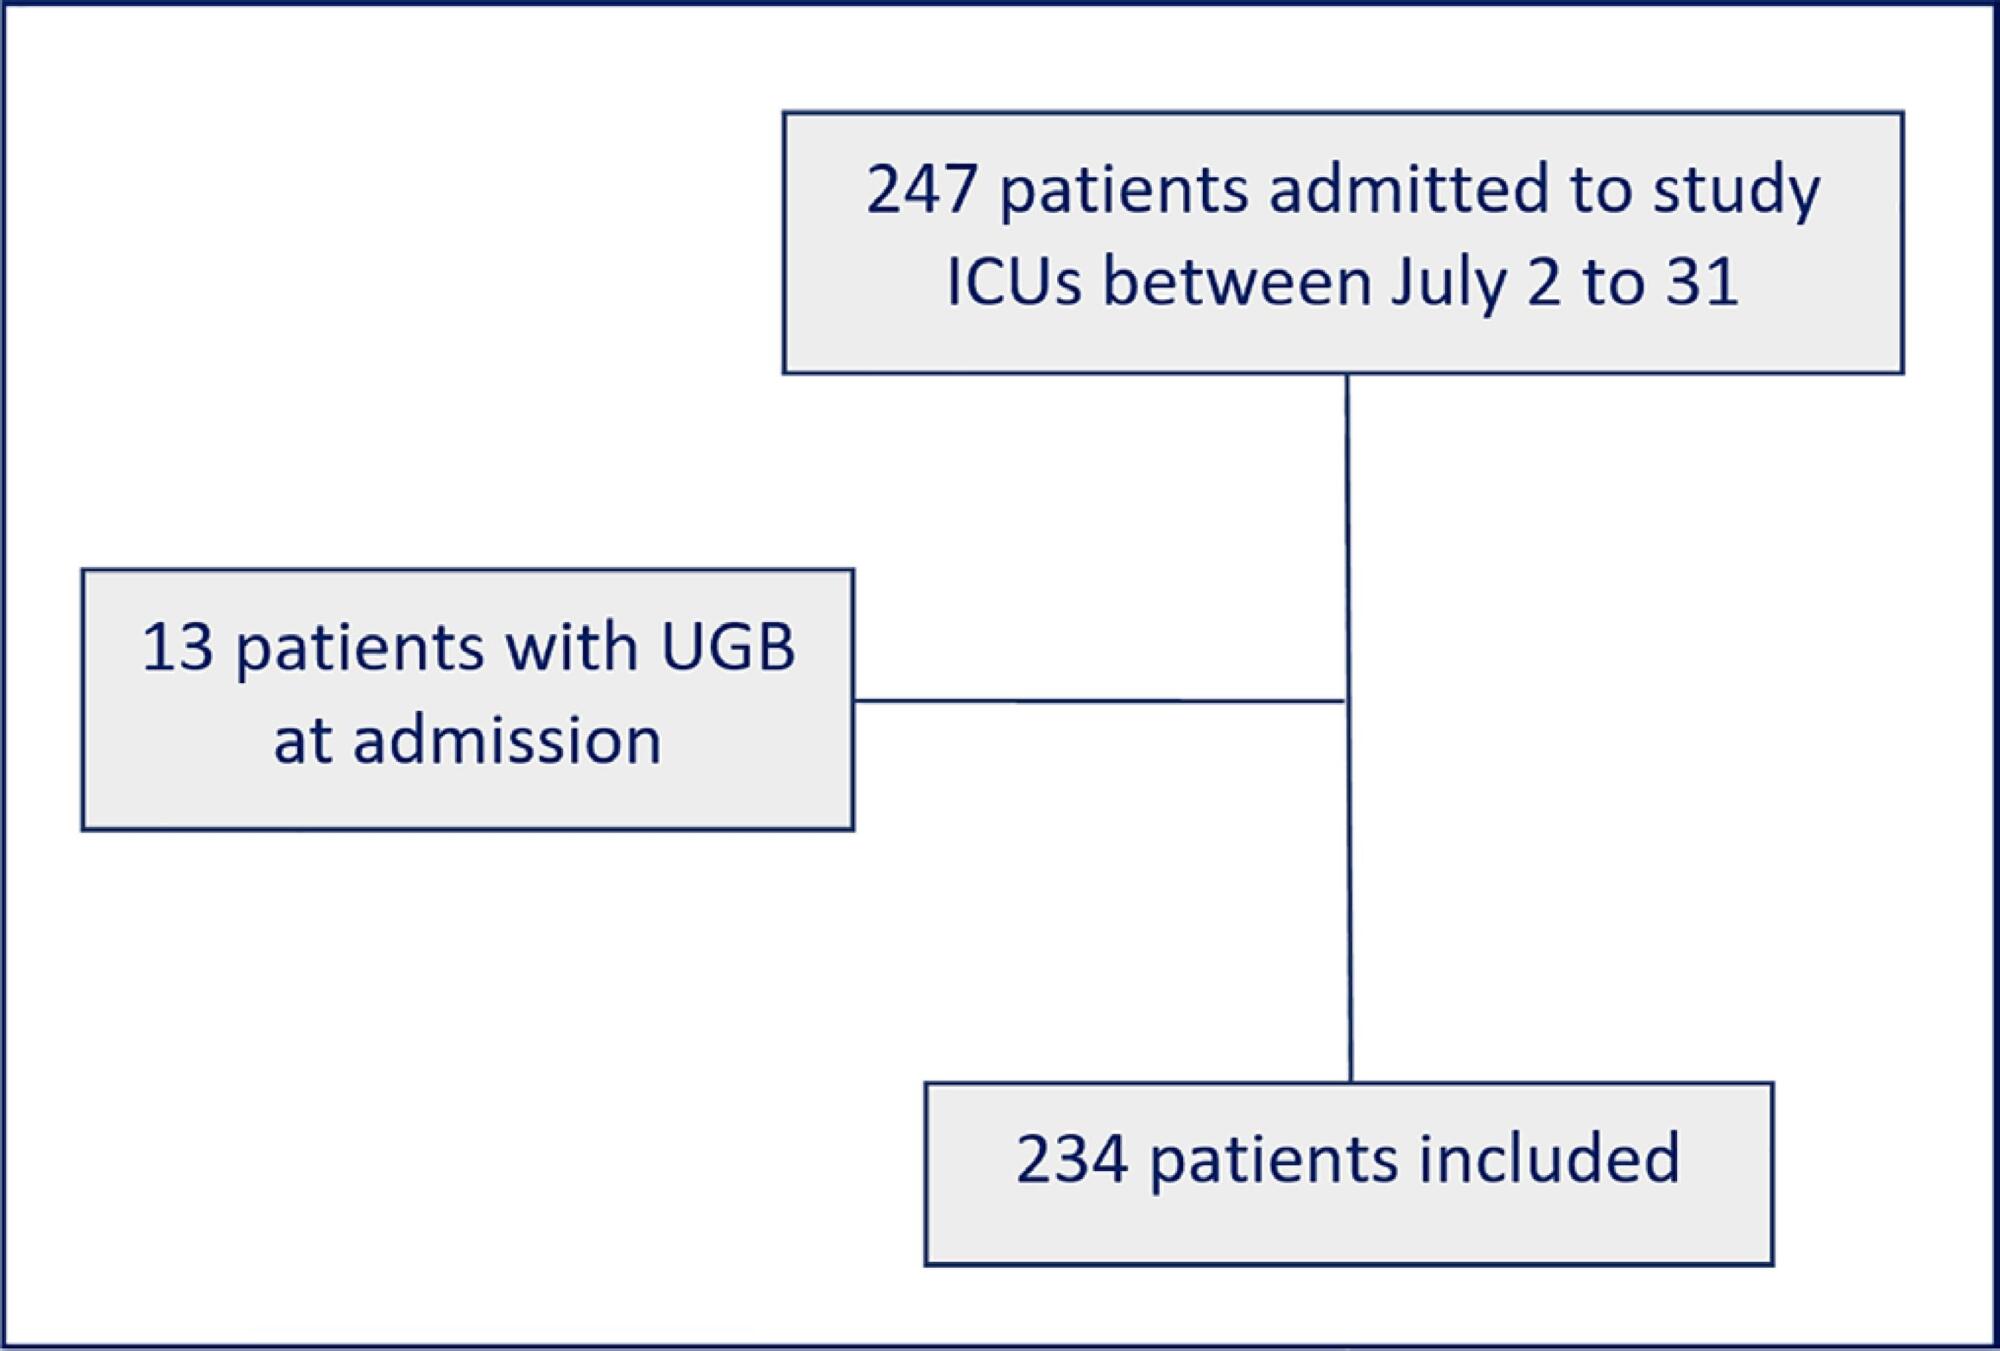 Adherence to a stress ulcer prophylaxis protocol by critically ill patients: a prospective cohort study